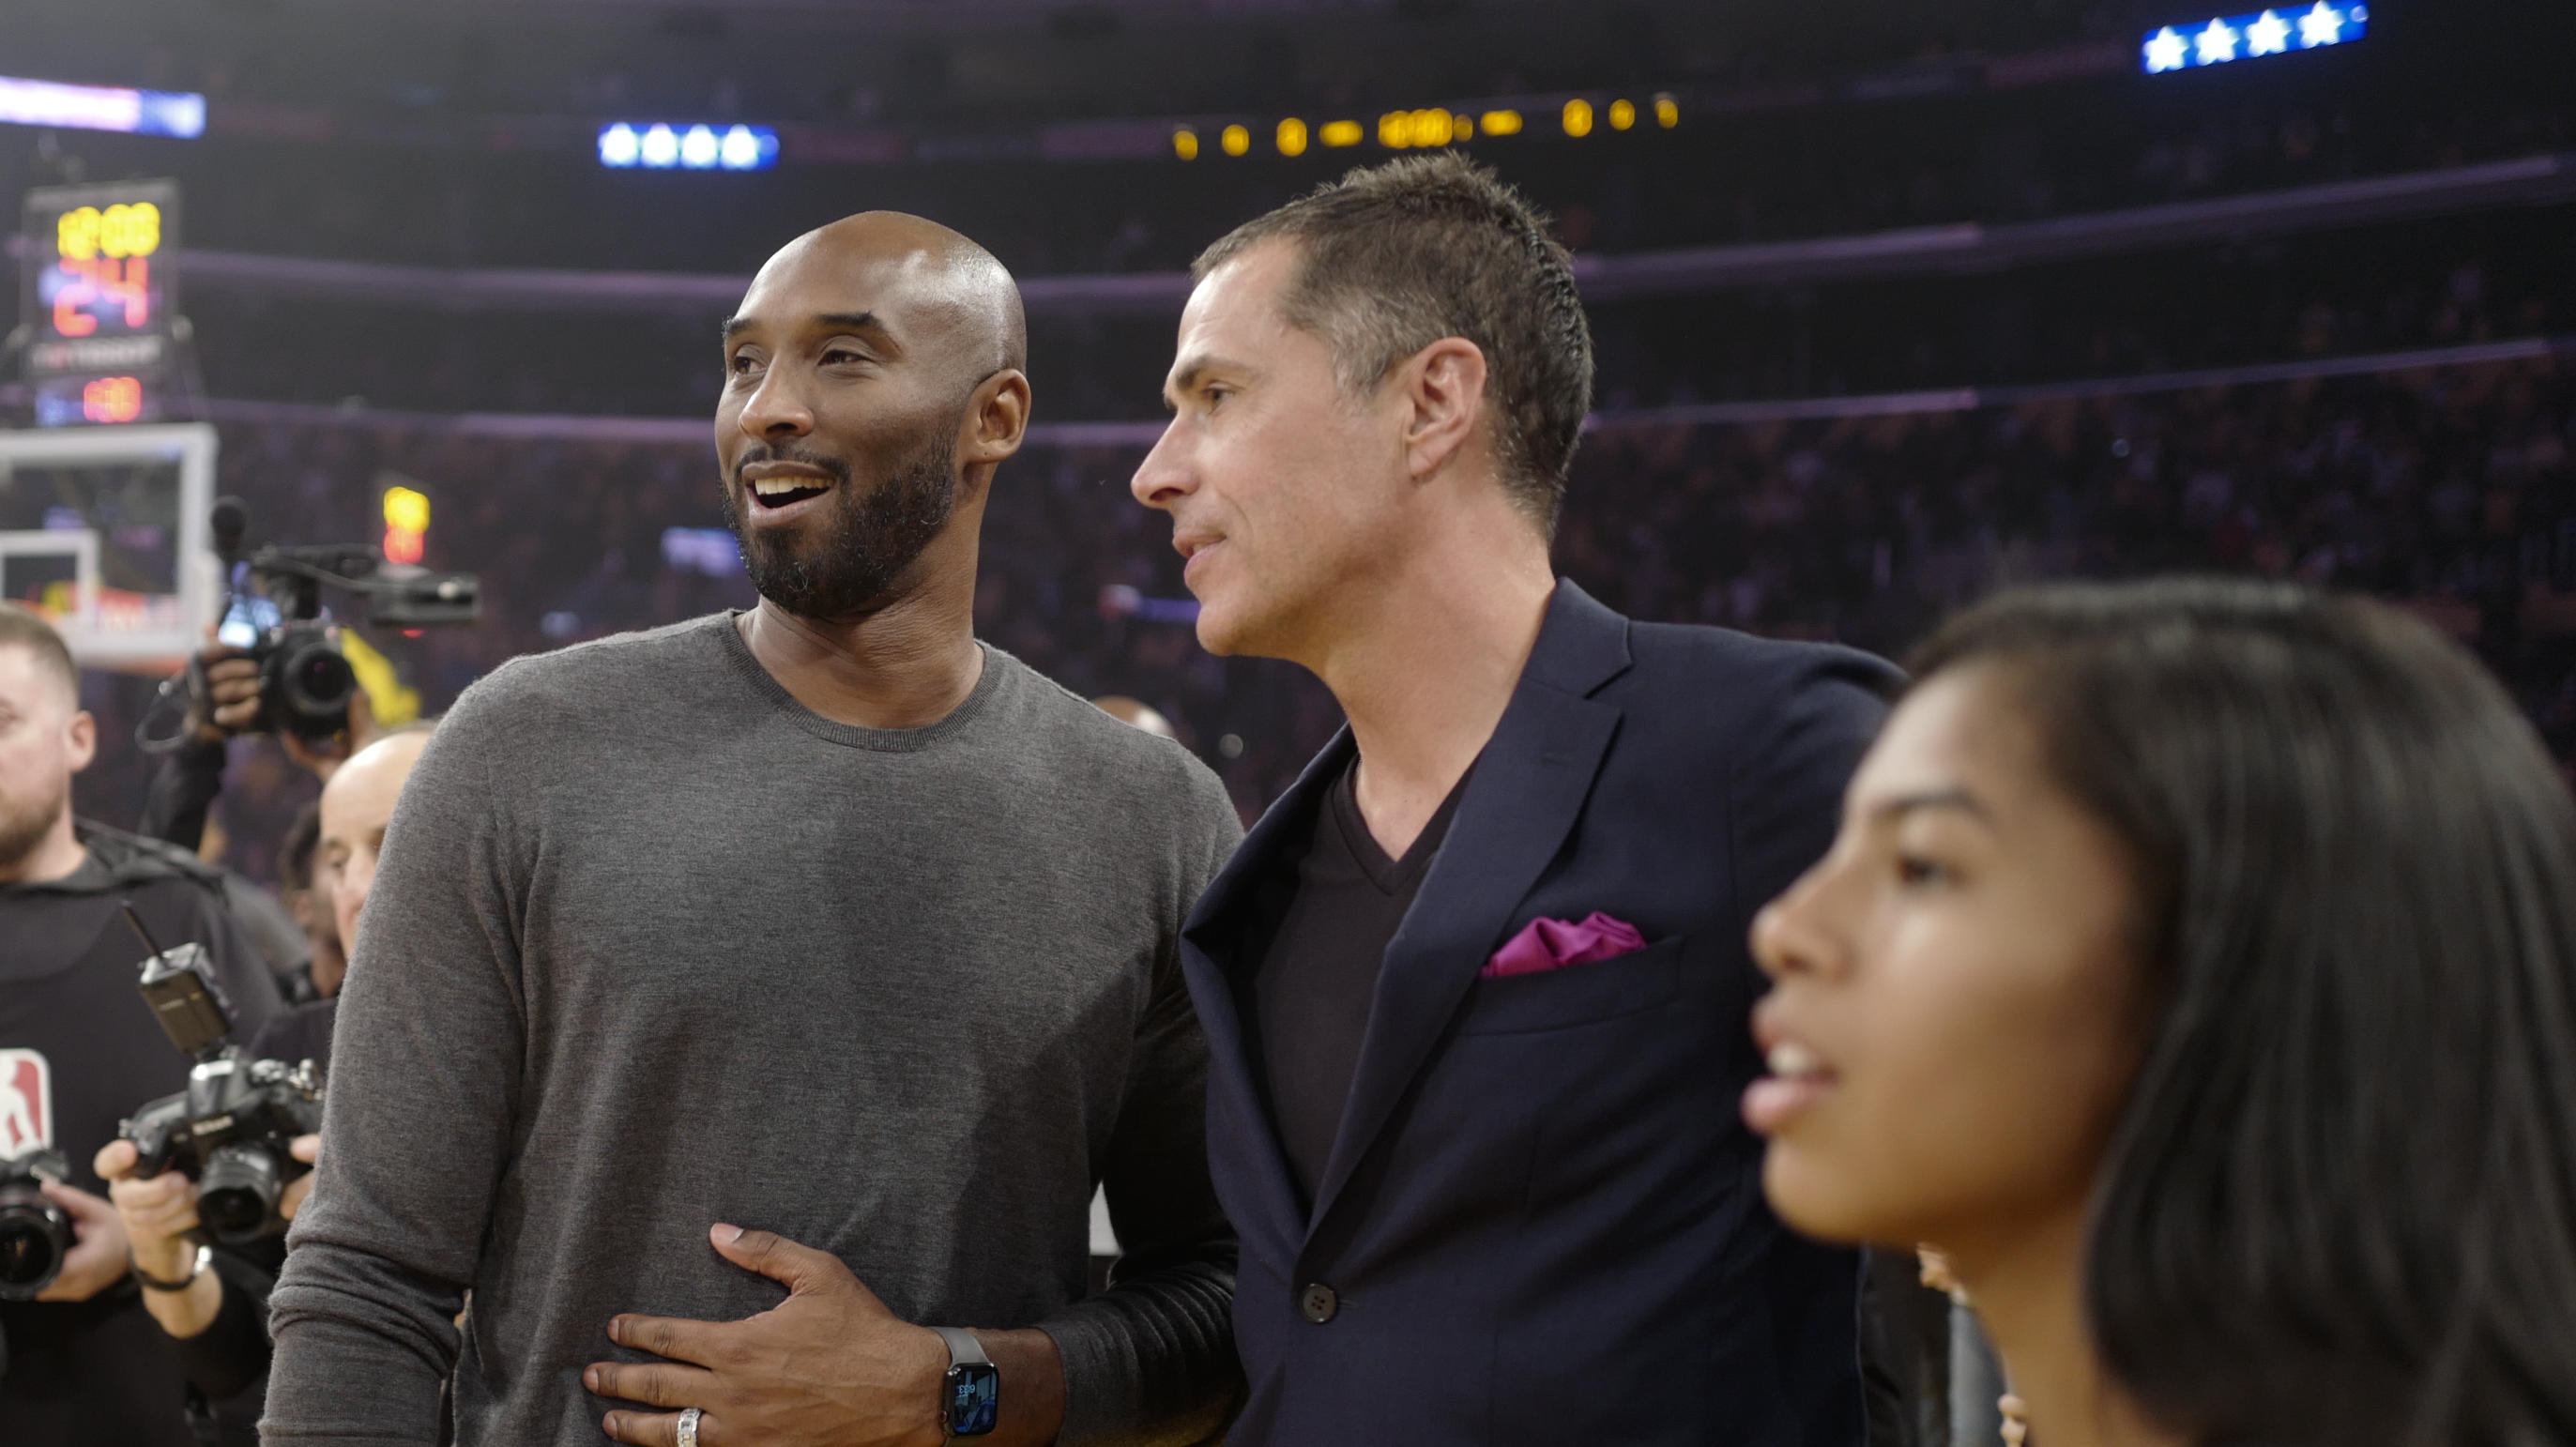 Lakers GM reveals final text he received from Kobe